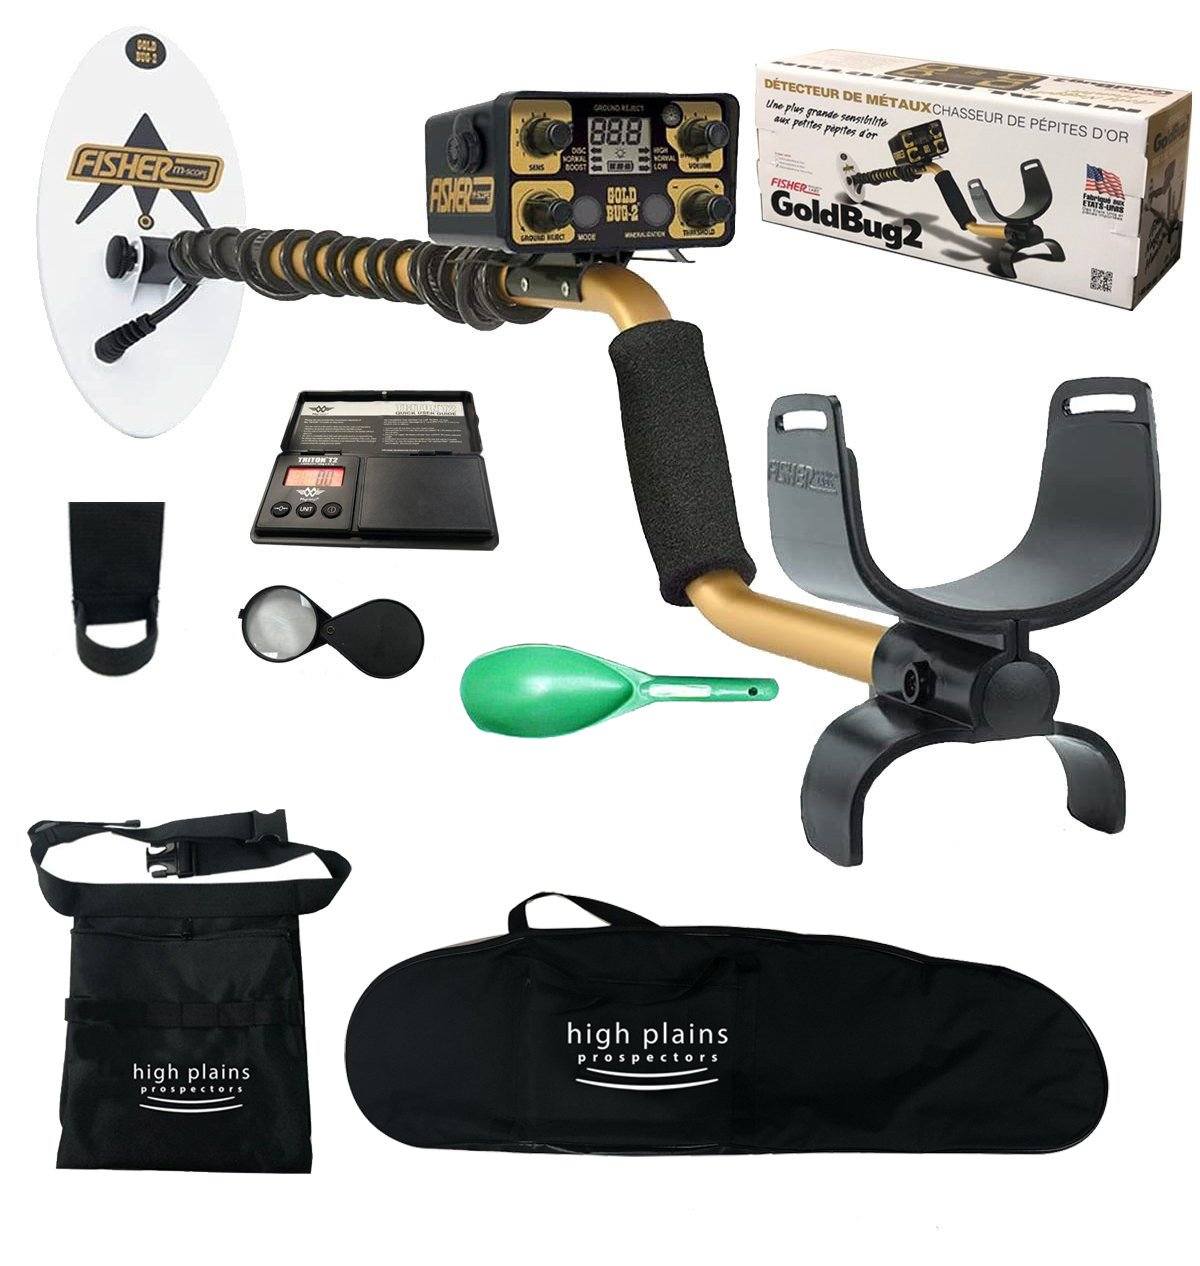 Fisher Gold Bug 2 Nugget Hunter Metal Detector 10" Coil Bundle with Free Gear, Carry Bag